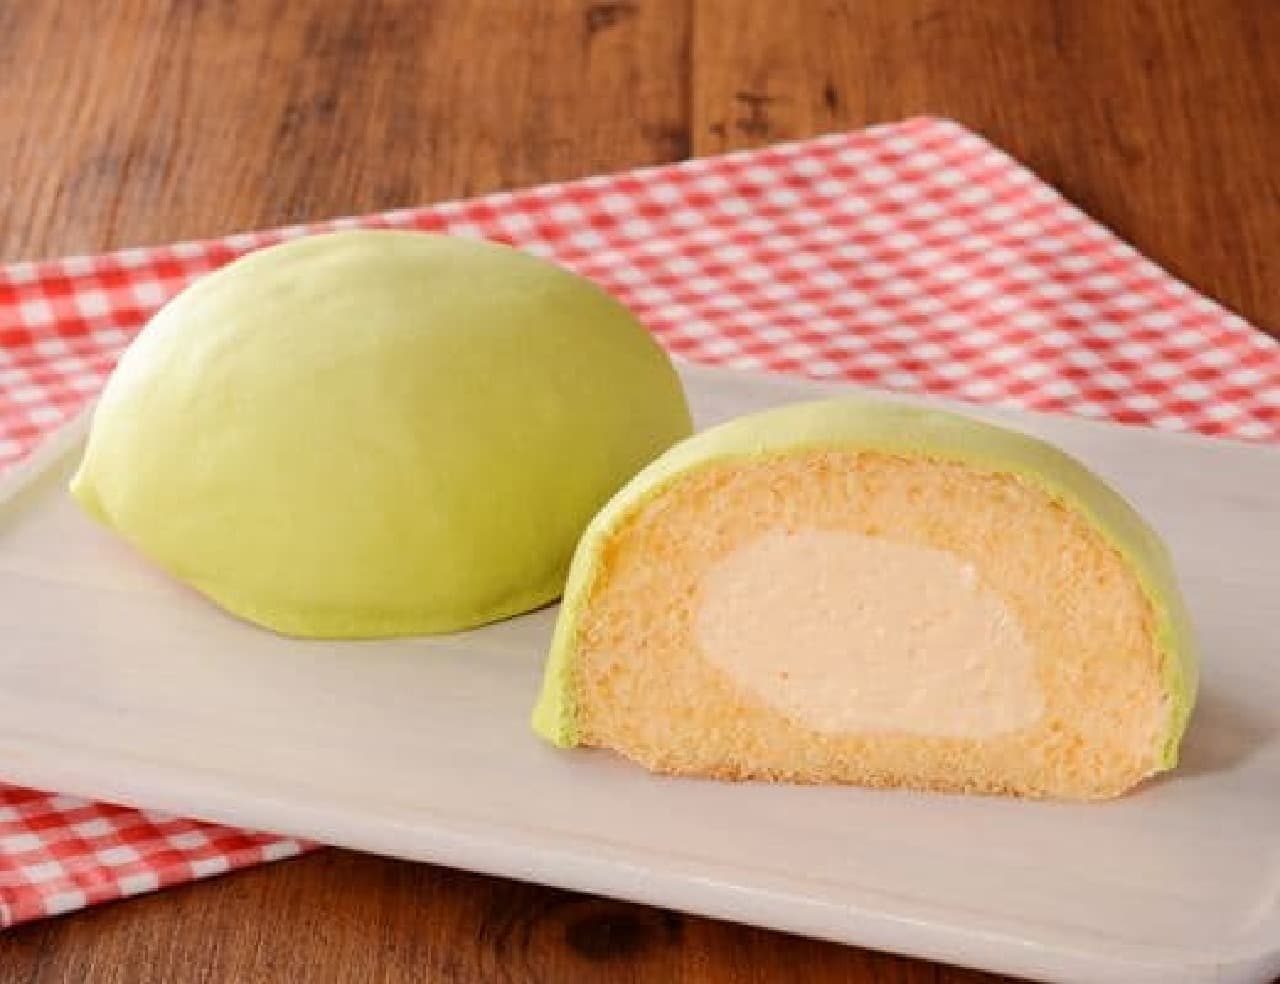 LAWSON "Squished! Moist Melon Pan with Red Melon Whip